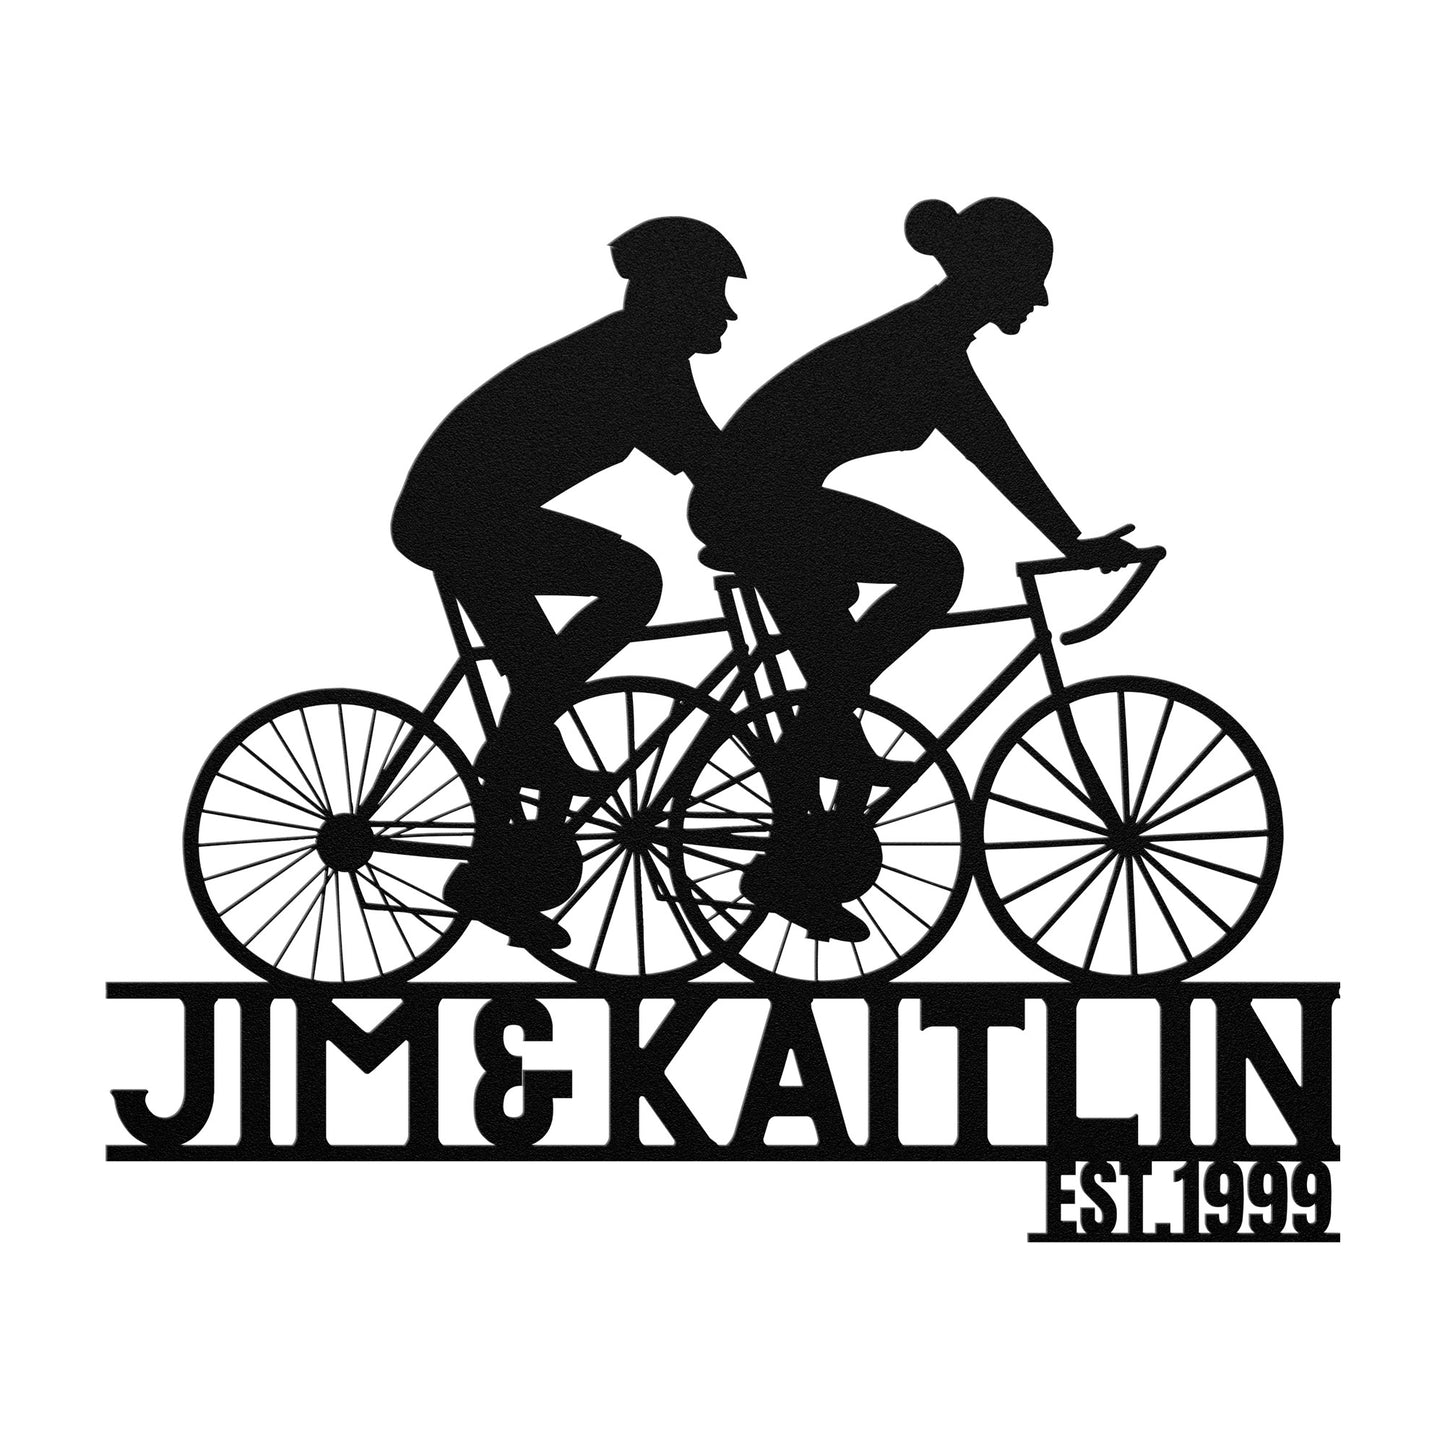 A Personalized Couple Cycling Metal Wall Art Sign from teelaunch, featuring a powder coated metal sign in the shape of a silhouette, showcasing a couple named Jim and Katie riding bicycles. Perfect for home decor.